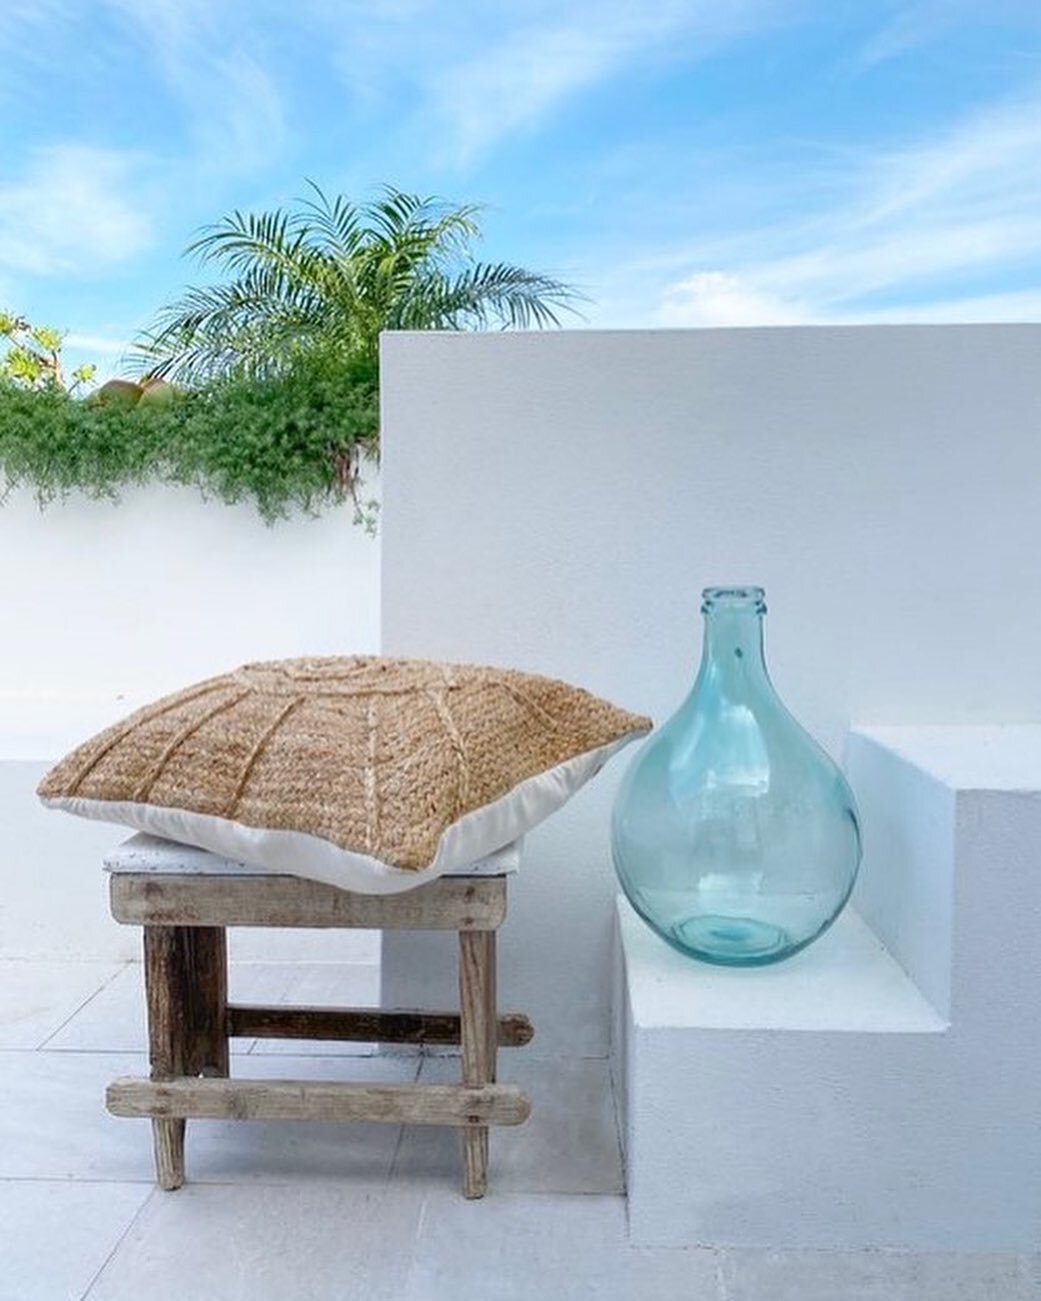 Add an aqua colored demijohn and jute pillows to bring a Med vibe to your decor. Available from our online shop. Link in bio 
.
.
.
.
#medvibes #terracedecor #santorinistyle #summervibes